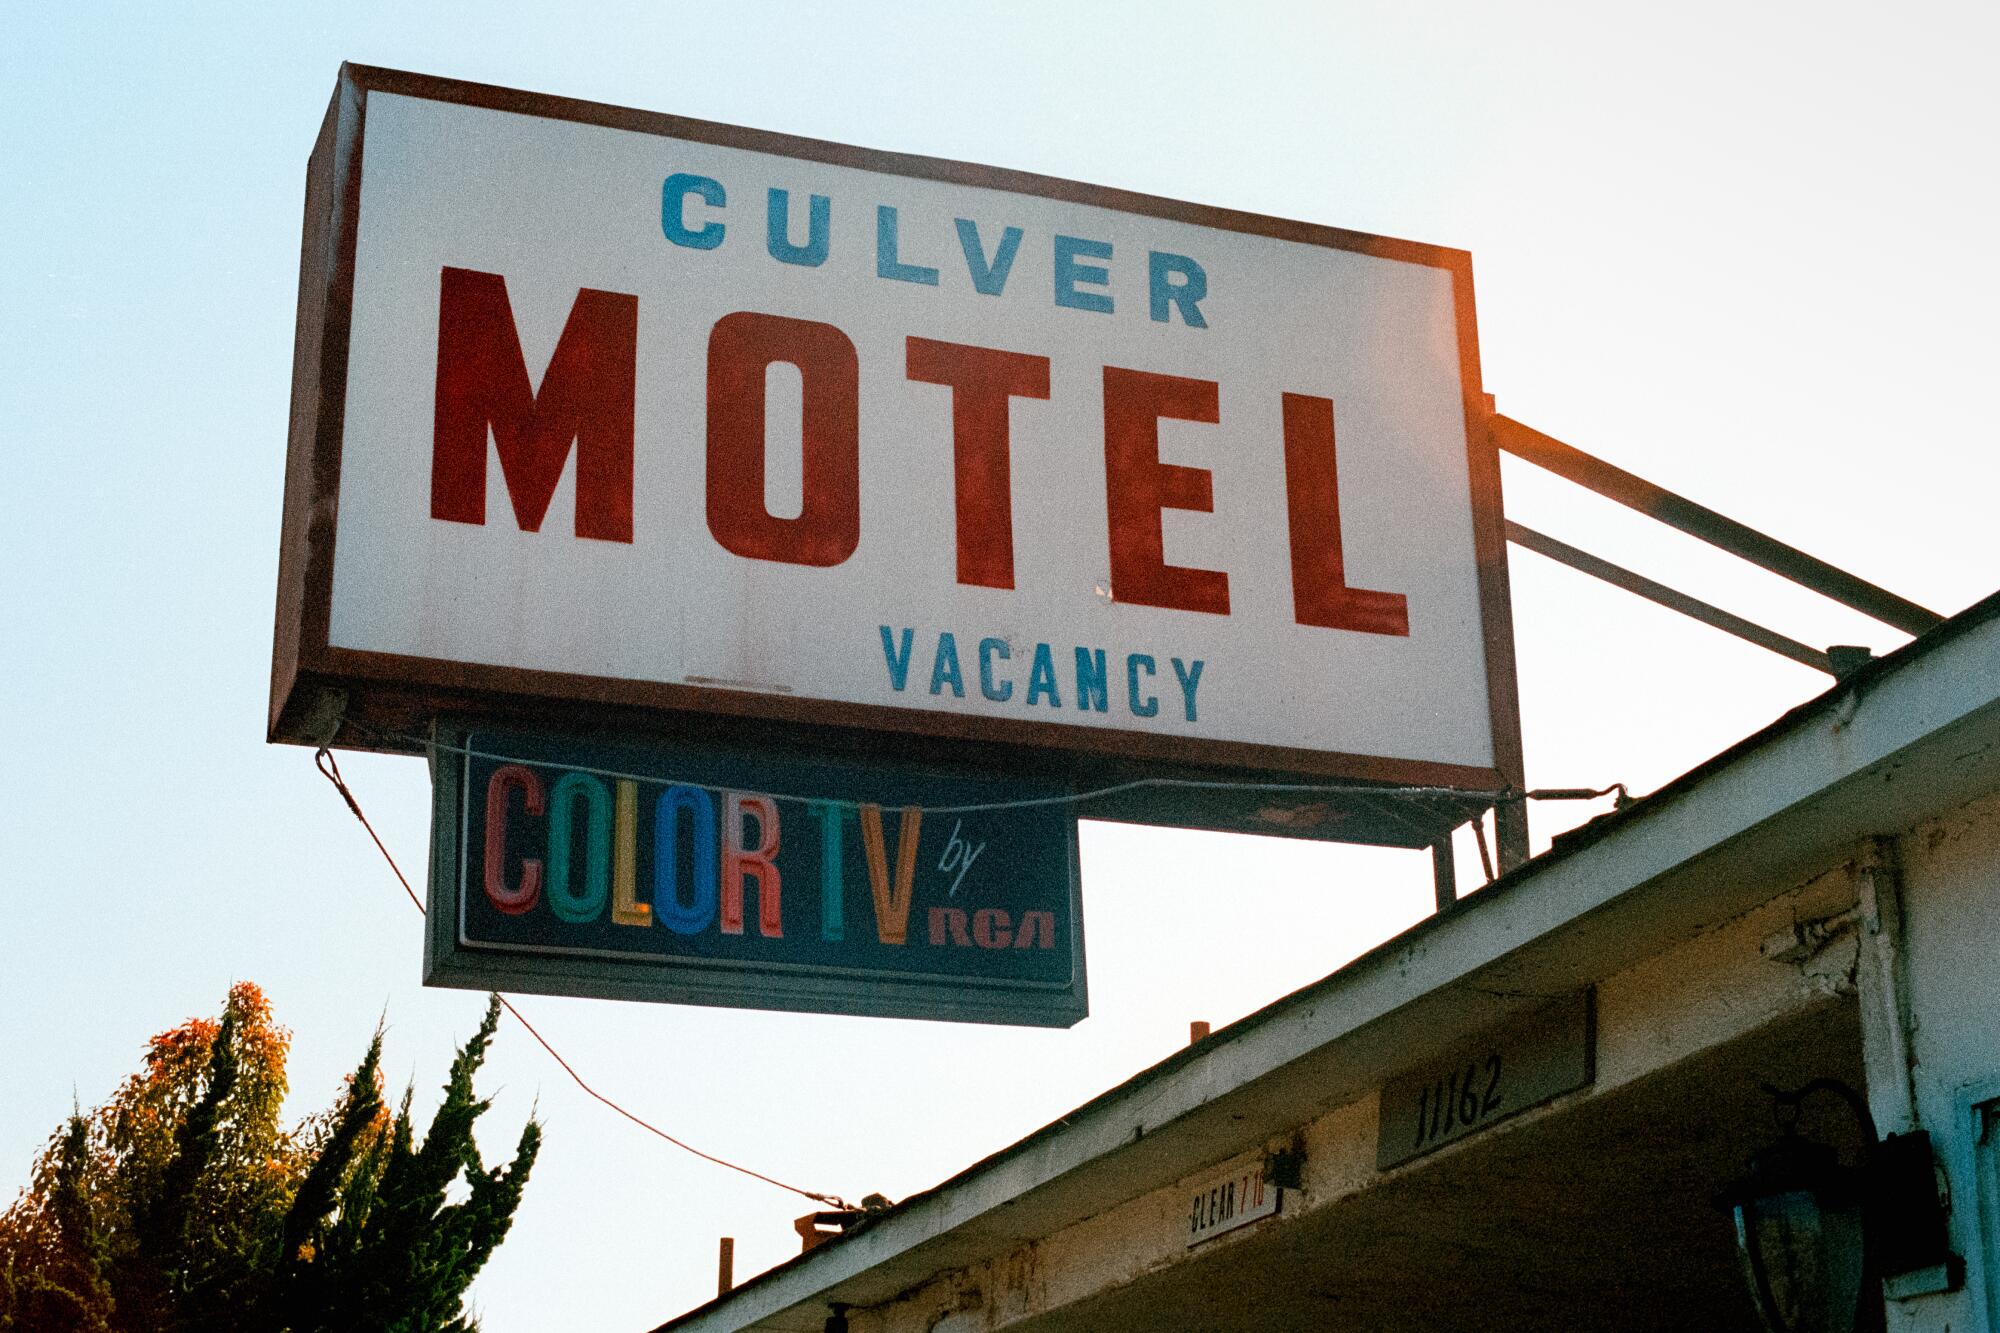 A sign for the Culver Motel.